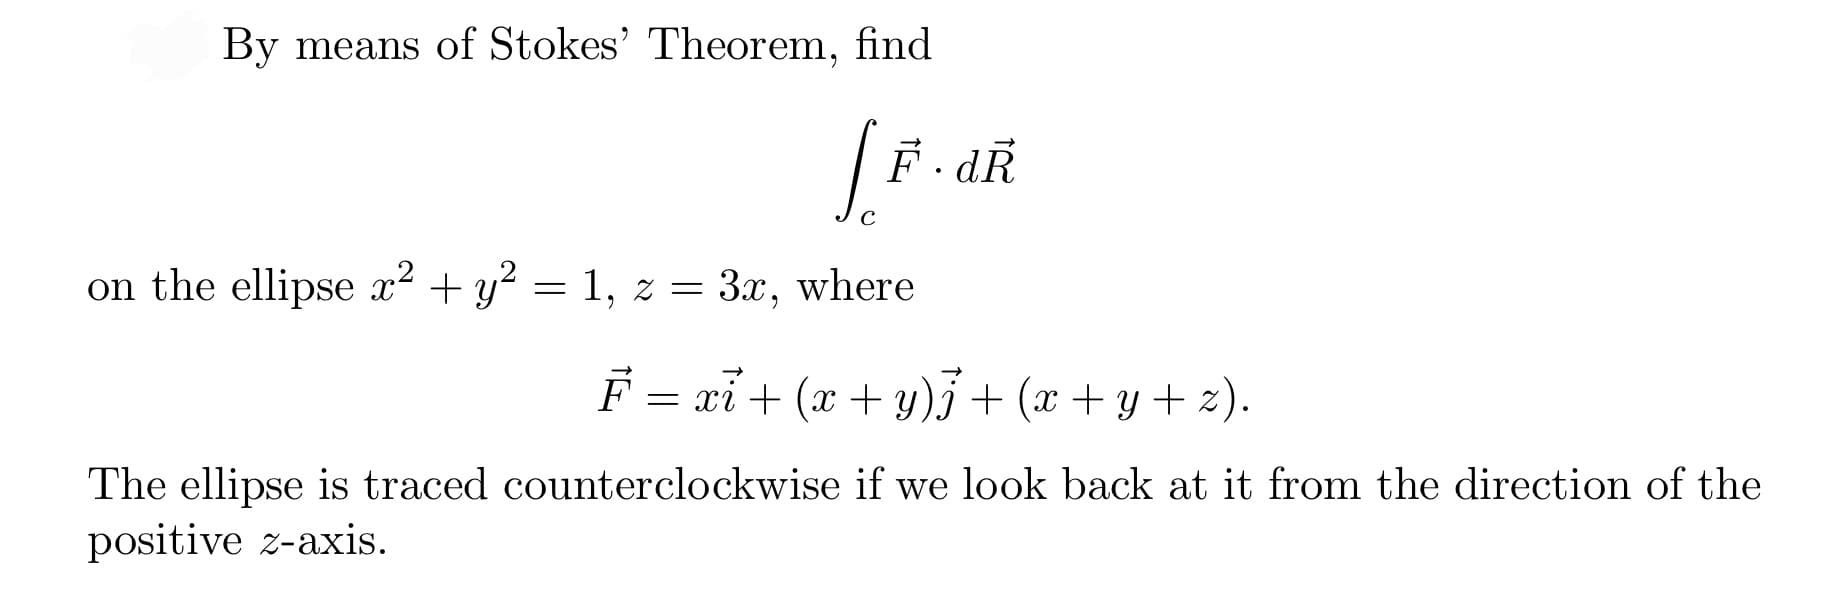 By means of Stokes' Theorem, find
| F. dŘ
3.x,
on the ellipse x² + y? = 1, z =
F = xỉ+ (x + y)3+ (x + y + z).
The ellipse is traced counterclockwise if we look back at it from the direction of the
positive z-axis.
